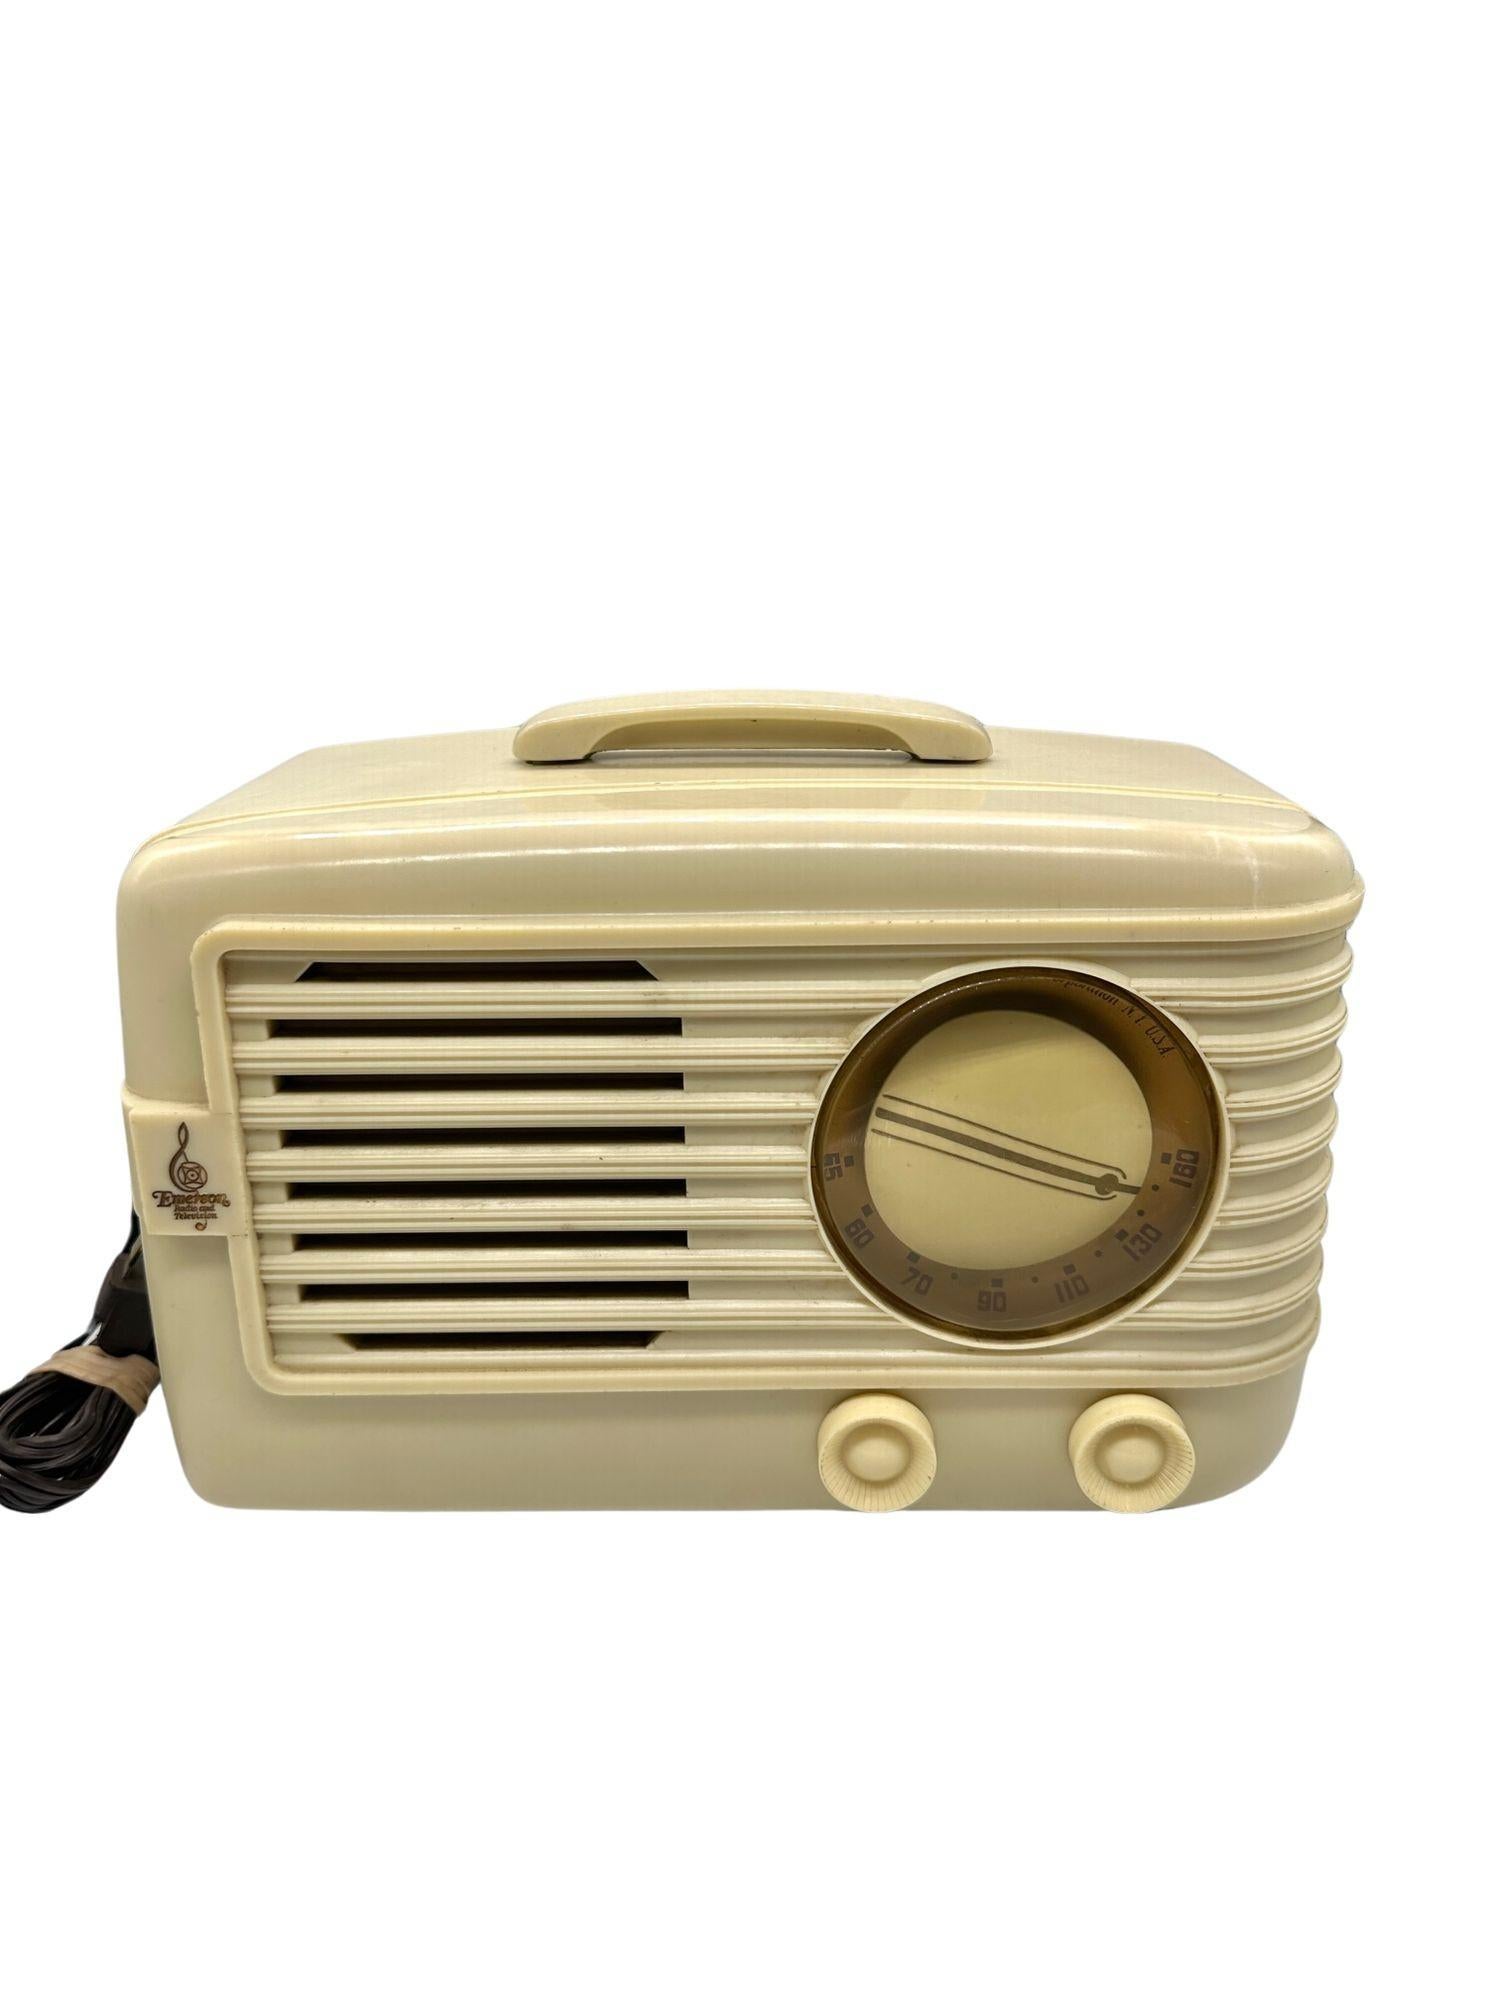 Ivory 1949 Emerson Model 581 Plaskon AM Tube Radio Golden Age Beauty

This radio was initially crafted using plaskon plastic, an enduring precursor to contemporary polycarbonate and styrene-based plastics. Manufactured by Emerson in the late 1940s,